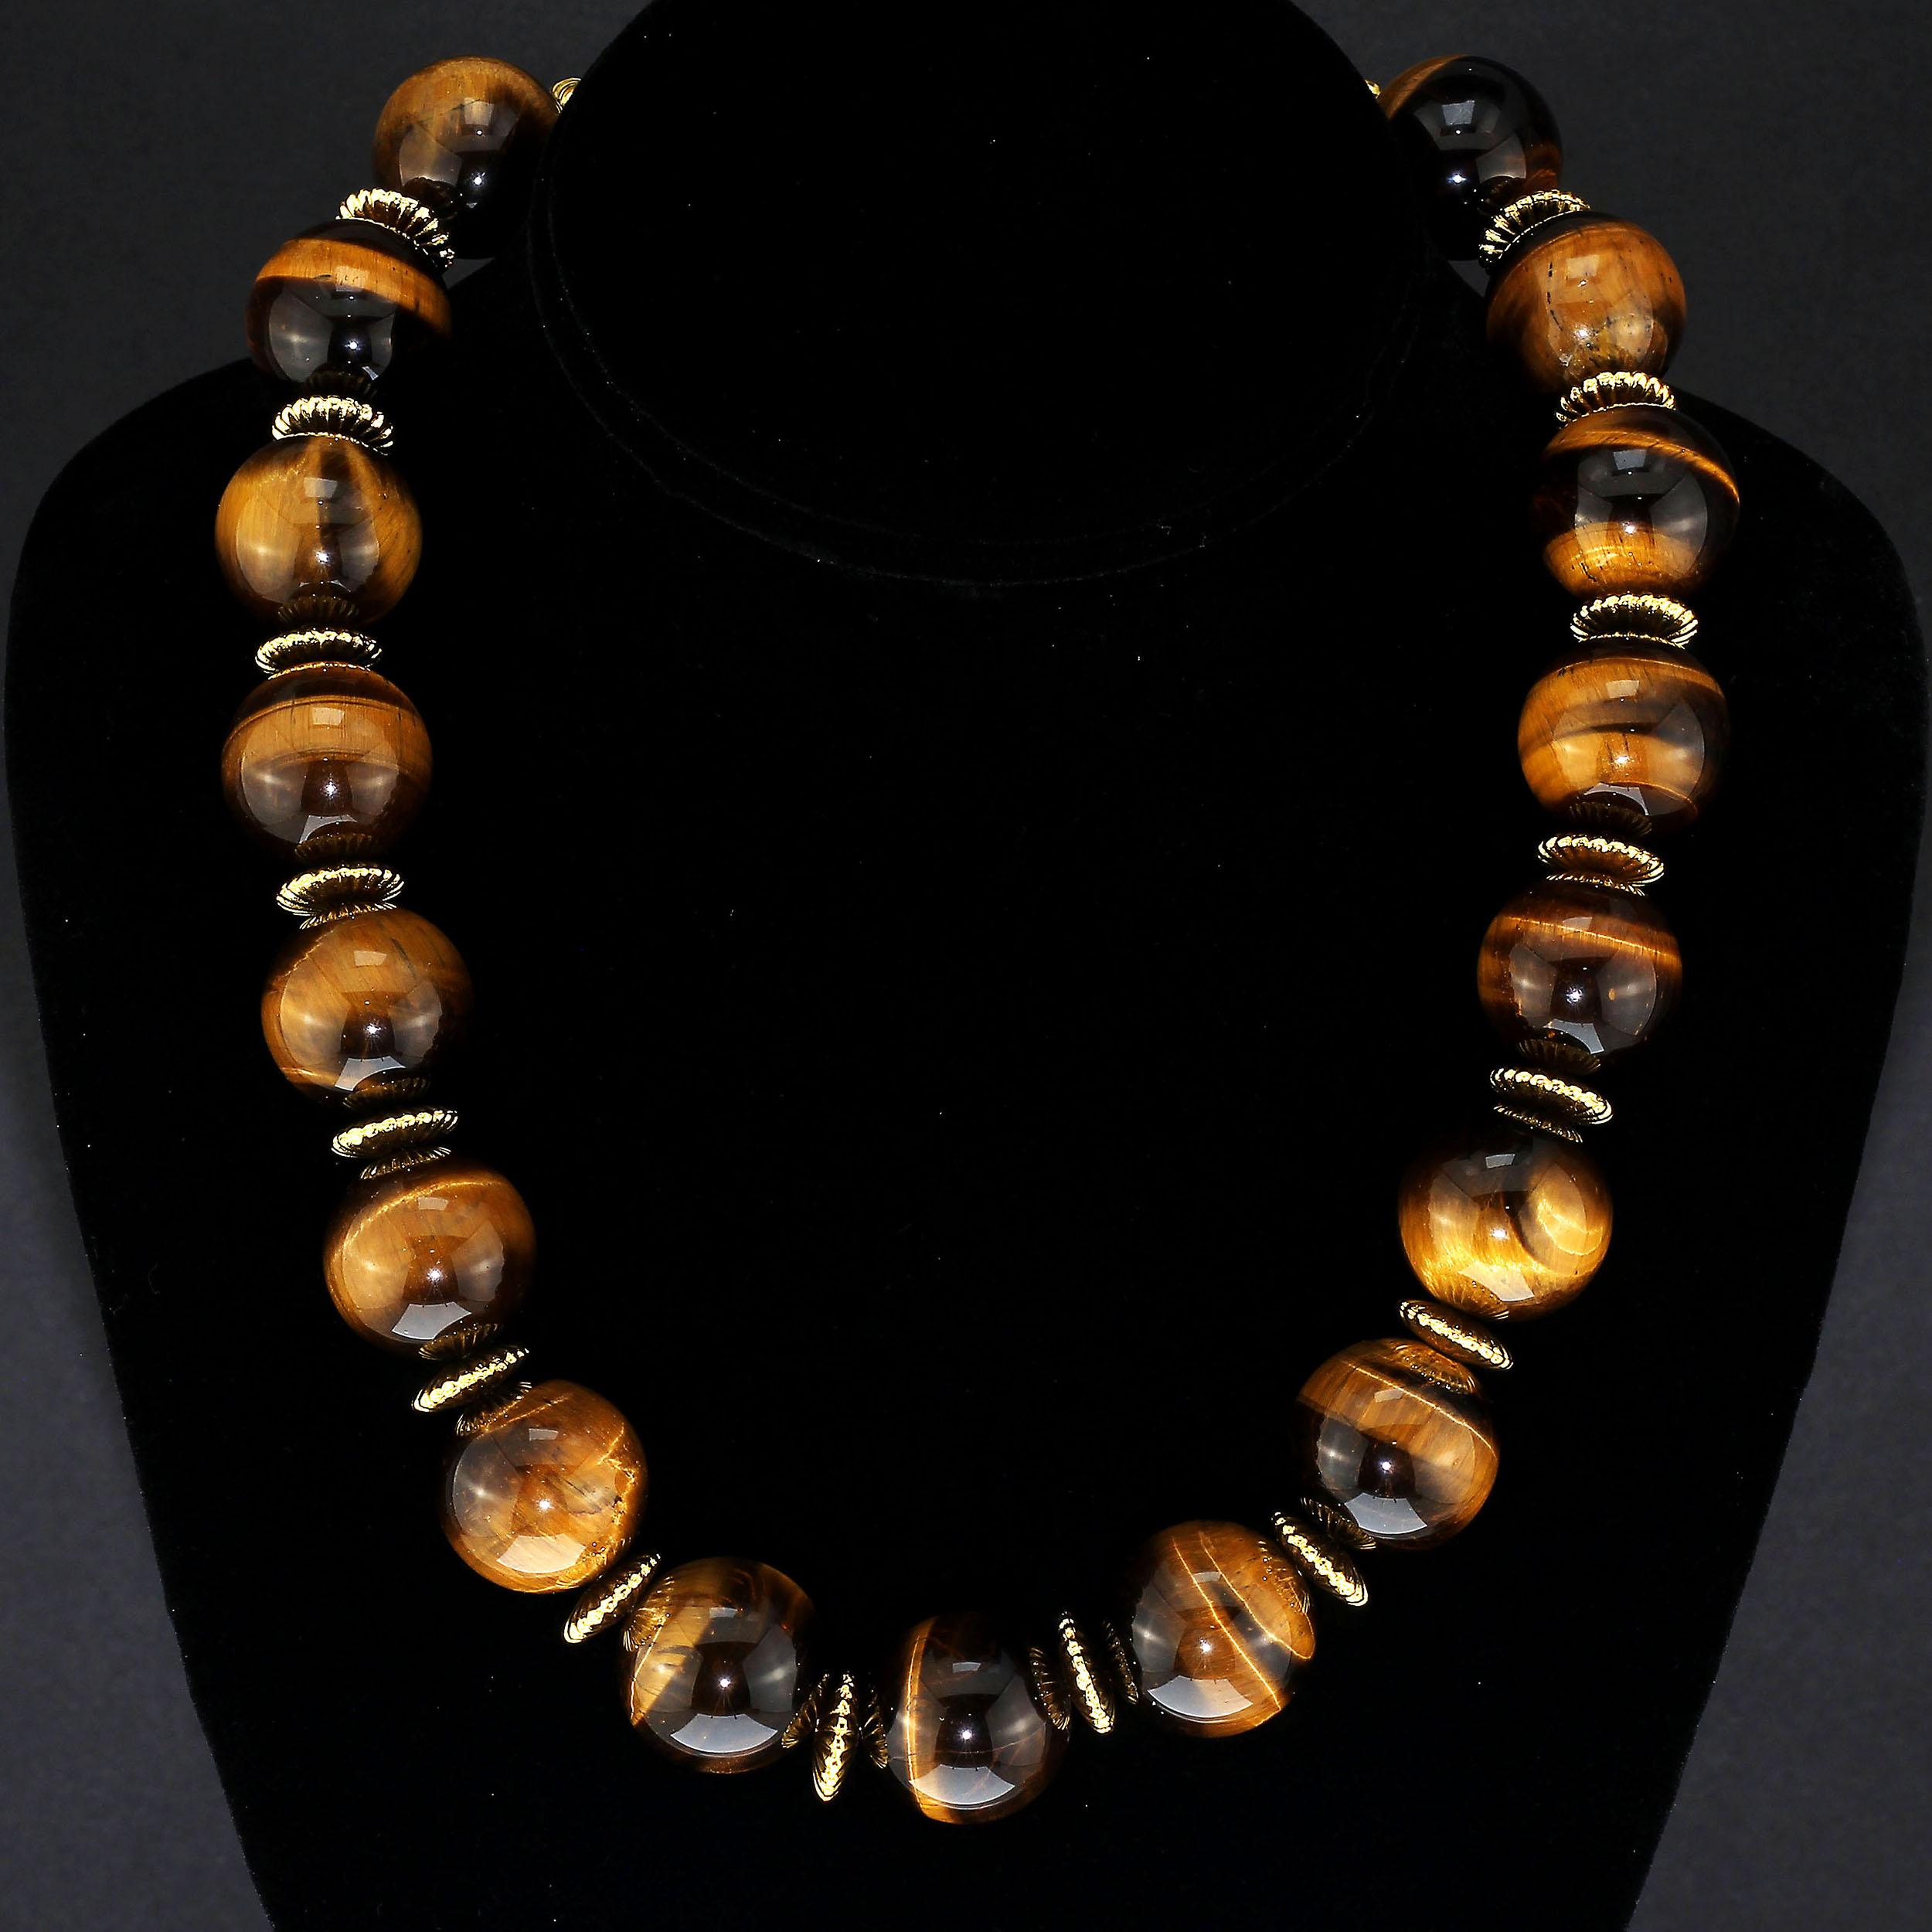 Women's or Men's AJD Statement Necklace of Magnificent Glowing Tiger's Eye